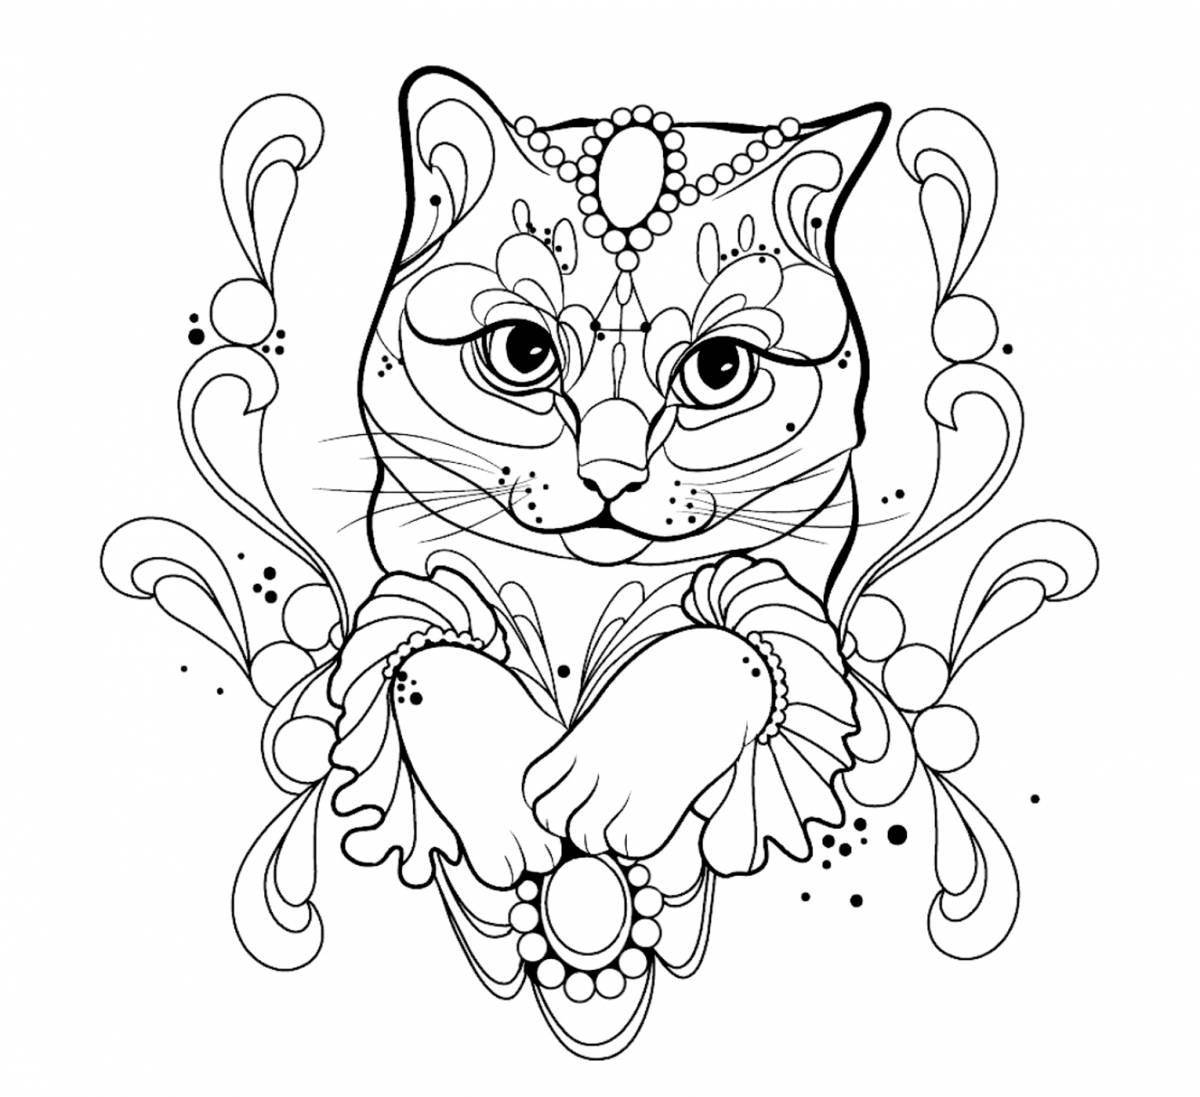 Coloring kitty merch